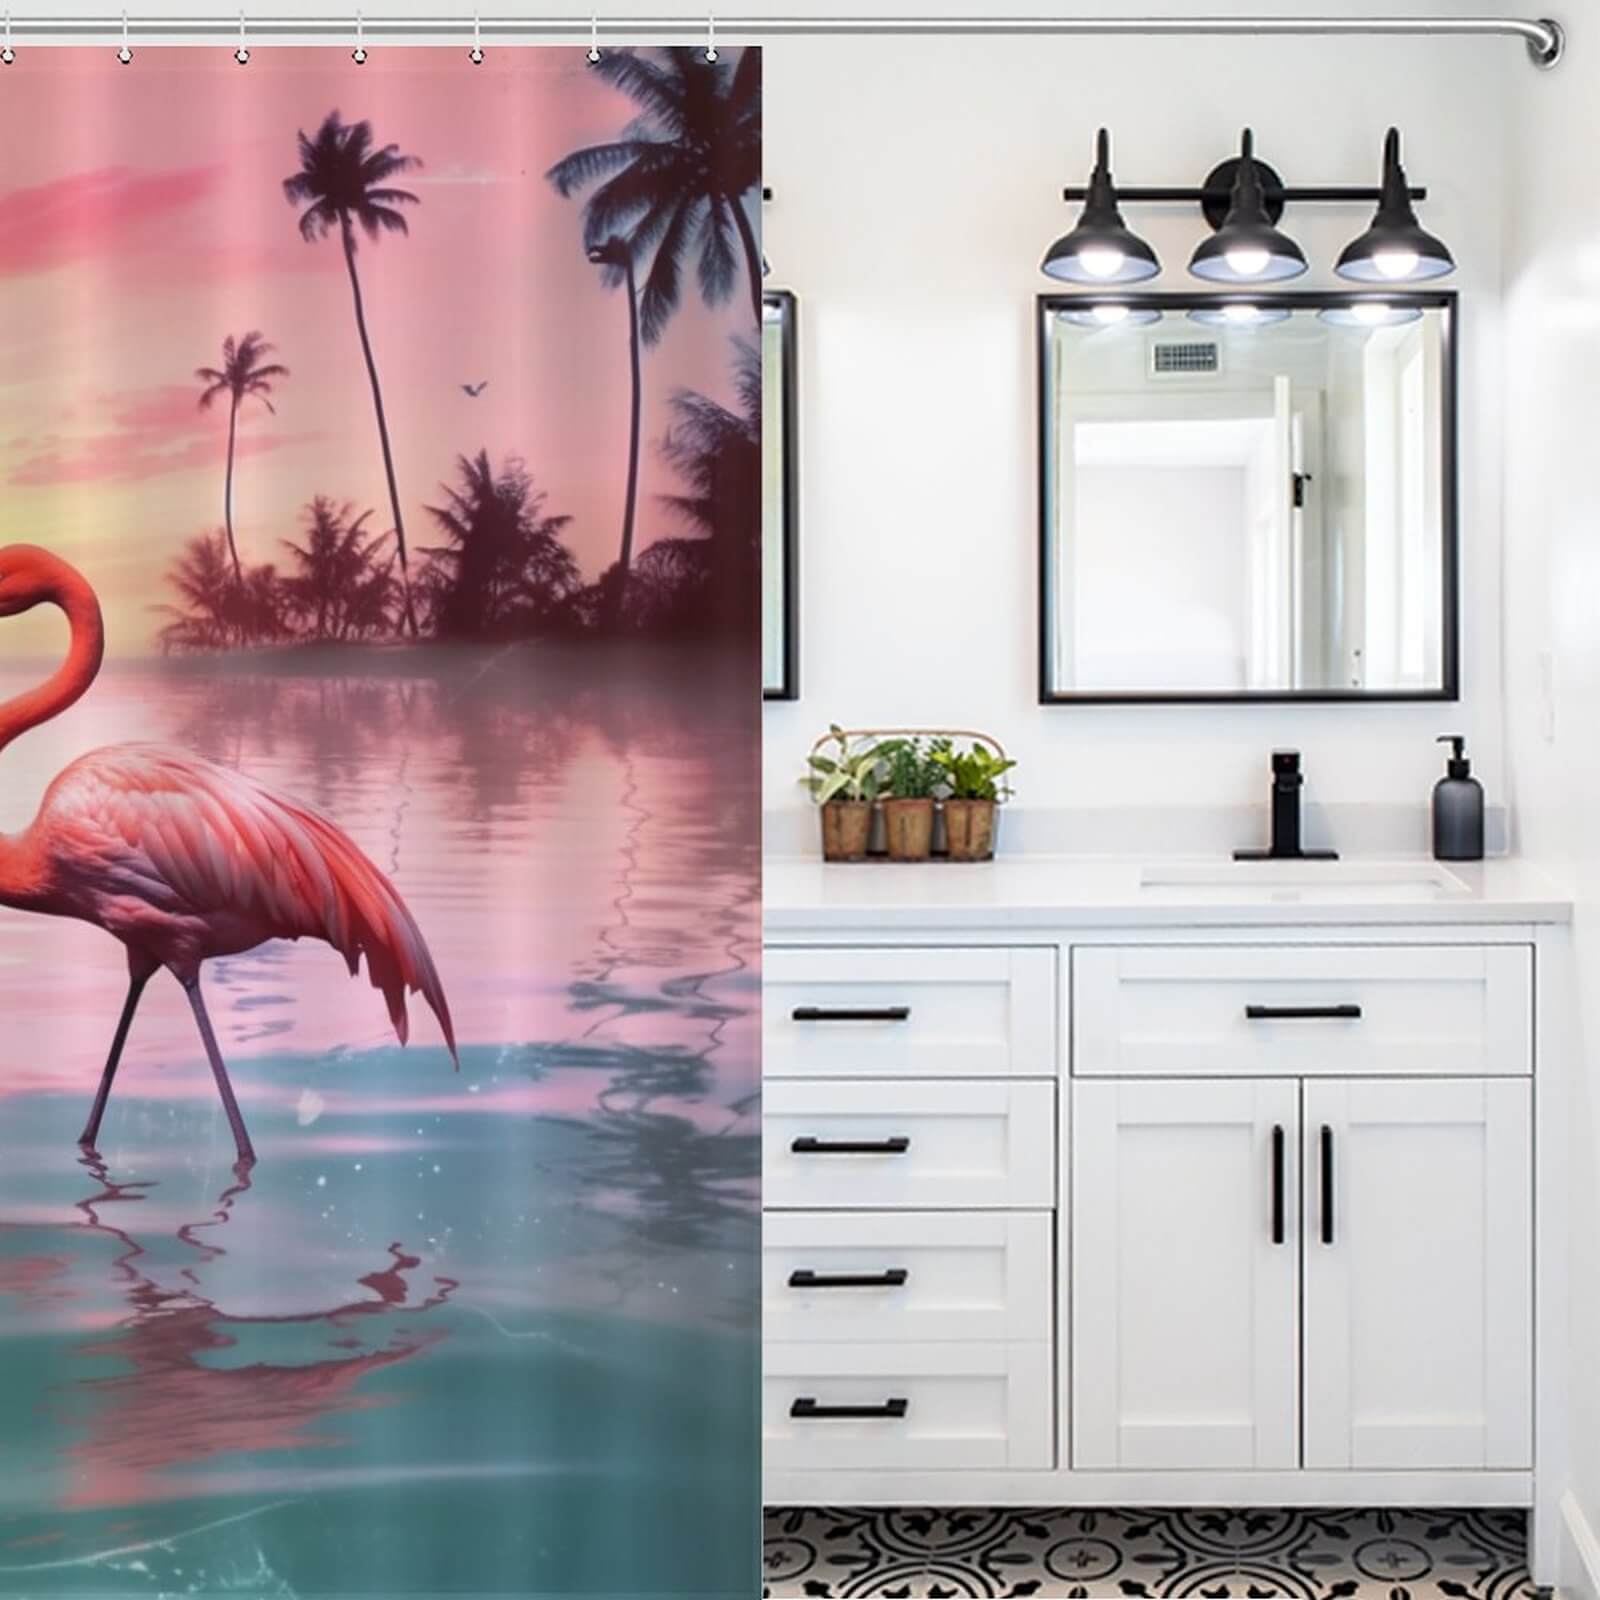 Transform your bathroom into a tropical paradise with the Ocean Beach Flamingo Shower Curtain-Cottoncat by Cotton Cat.